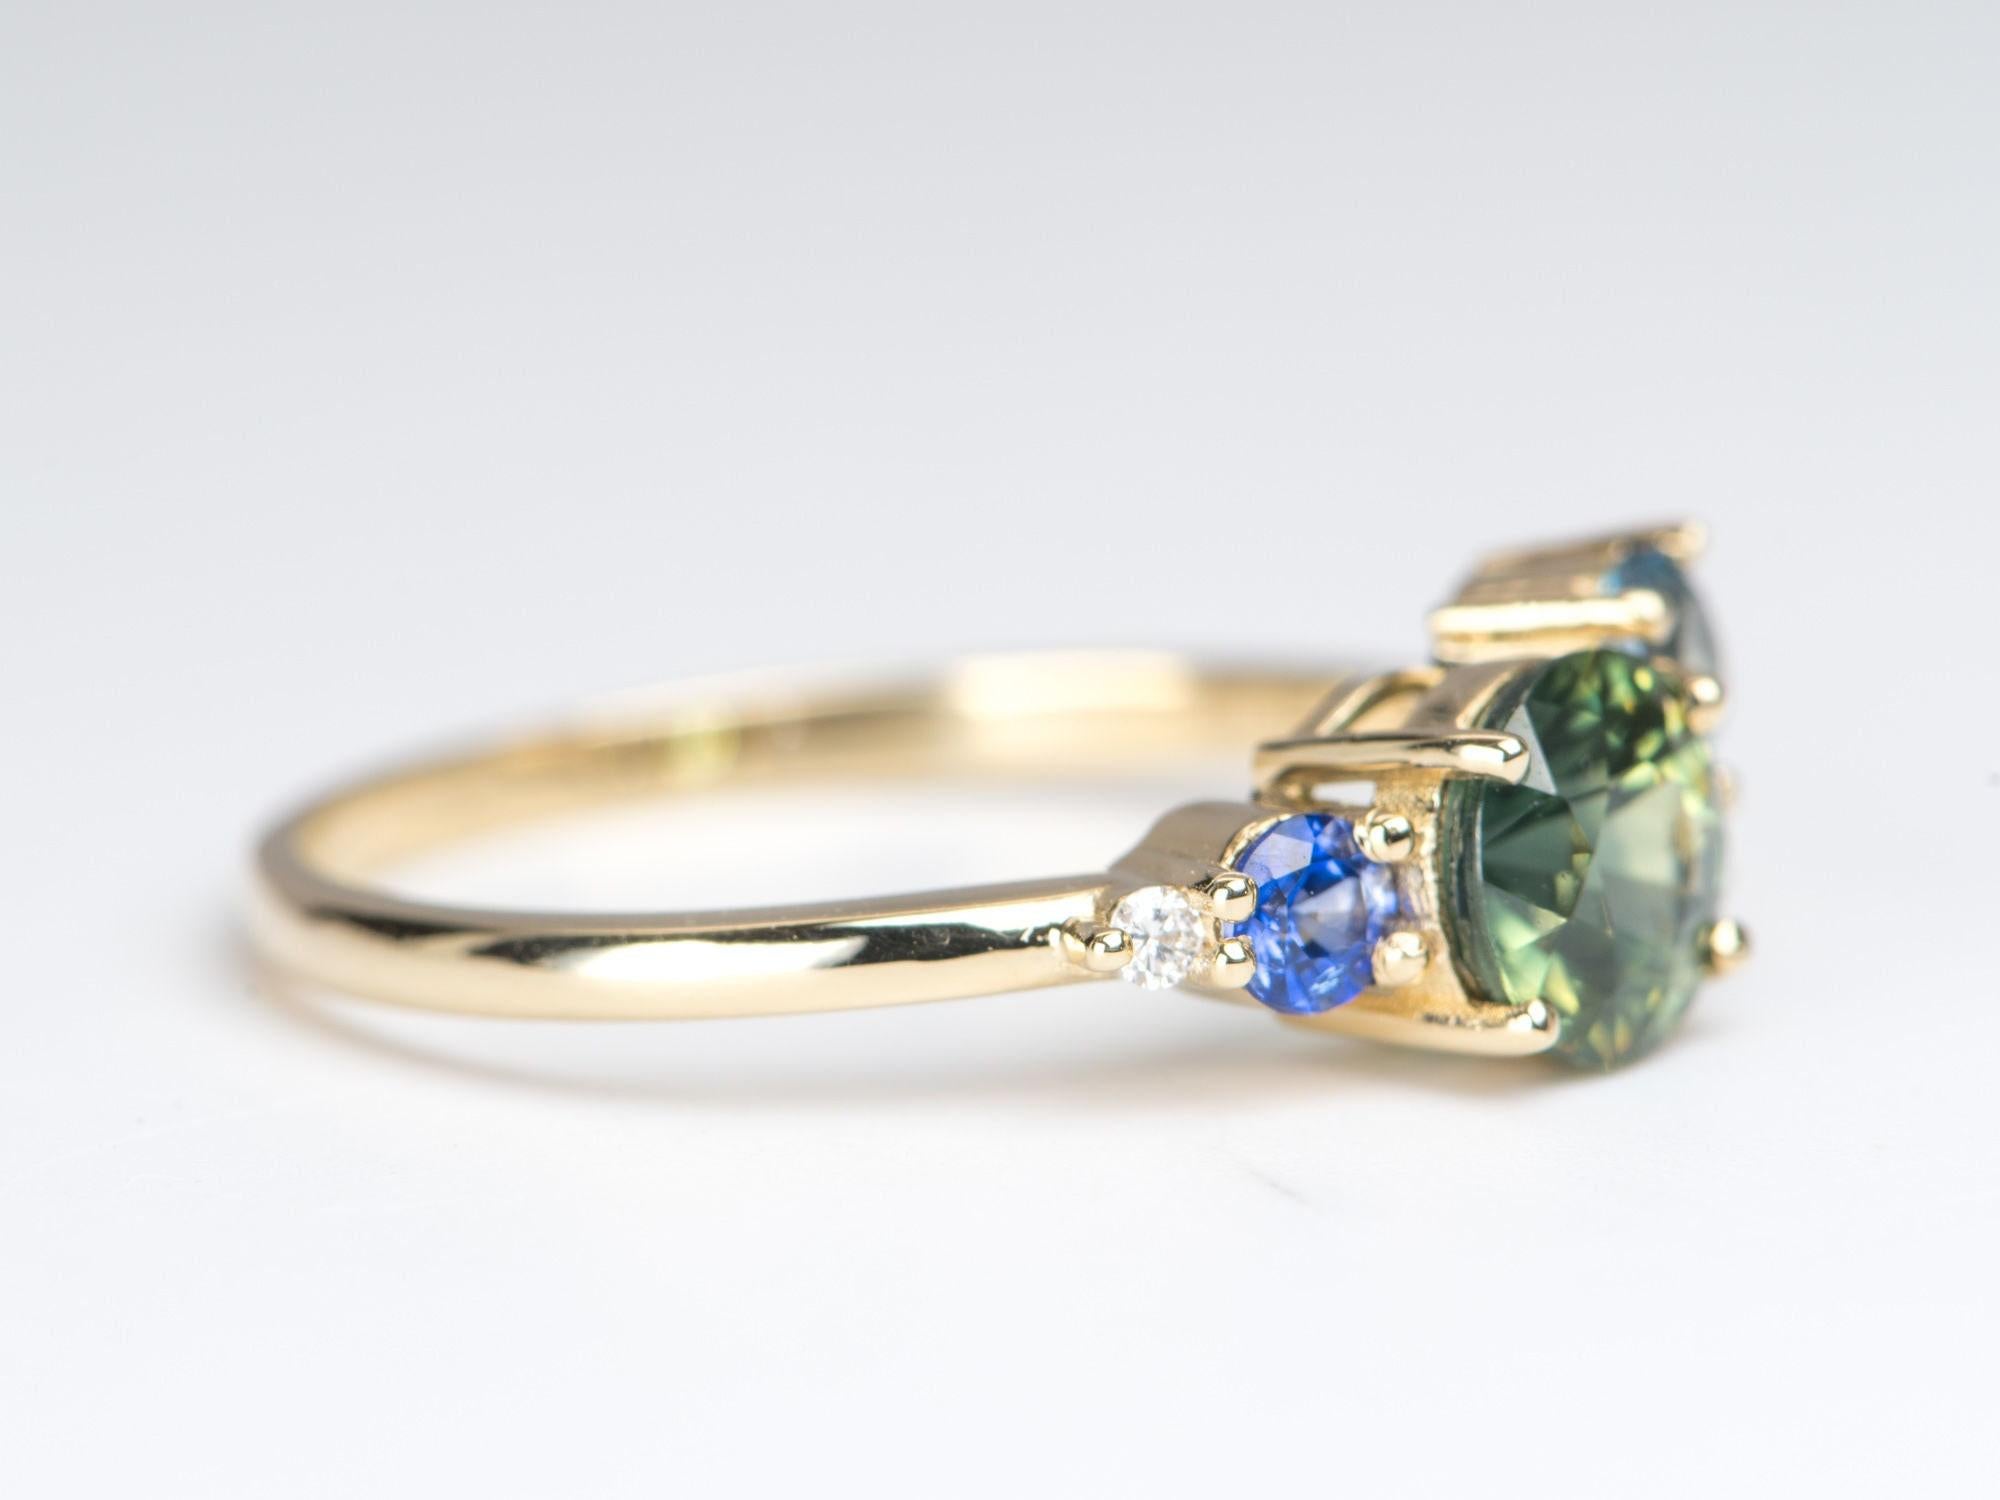 ♥ 1.2ct Teal Blue Sapphire Cluster Ring 14K Yellow Gold Diamond Topaz Tourmaline
♥ Solid 14k yellow gold ring set with a beautiful round-shaped sapphire
♥ Gorgeous blue green color!
♥ The item measures 6.6 mm in length, 15.6 mm in width, and stands